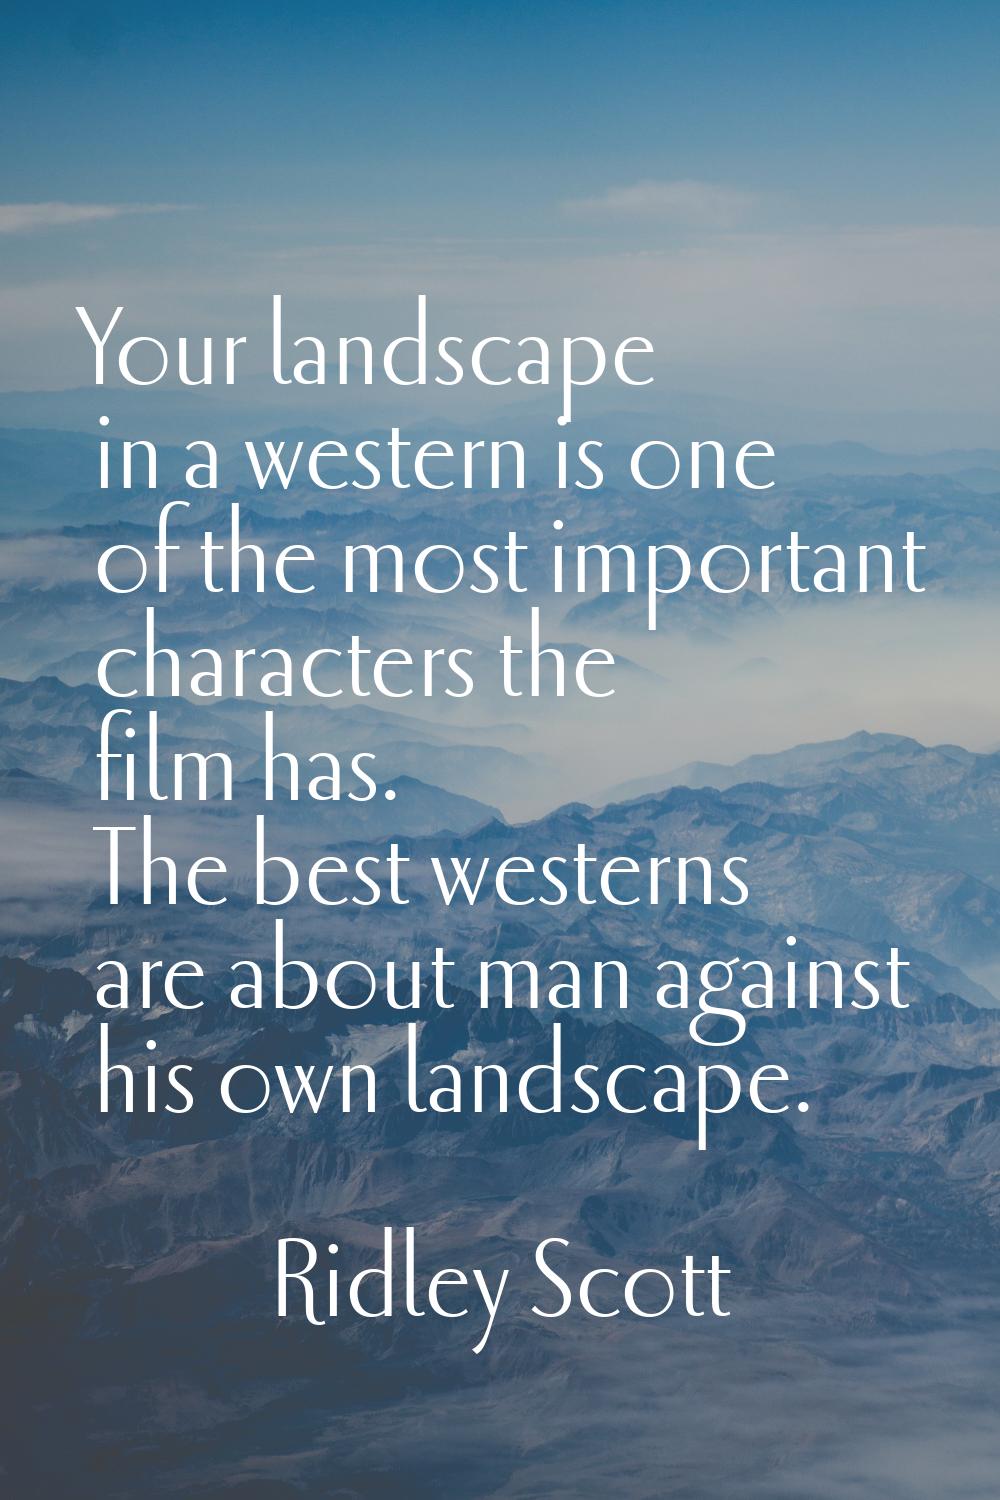 Your landscape in a western is one of the most important characters the film has. The best westerns